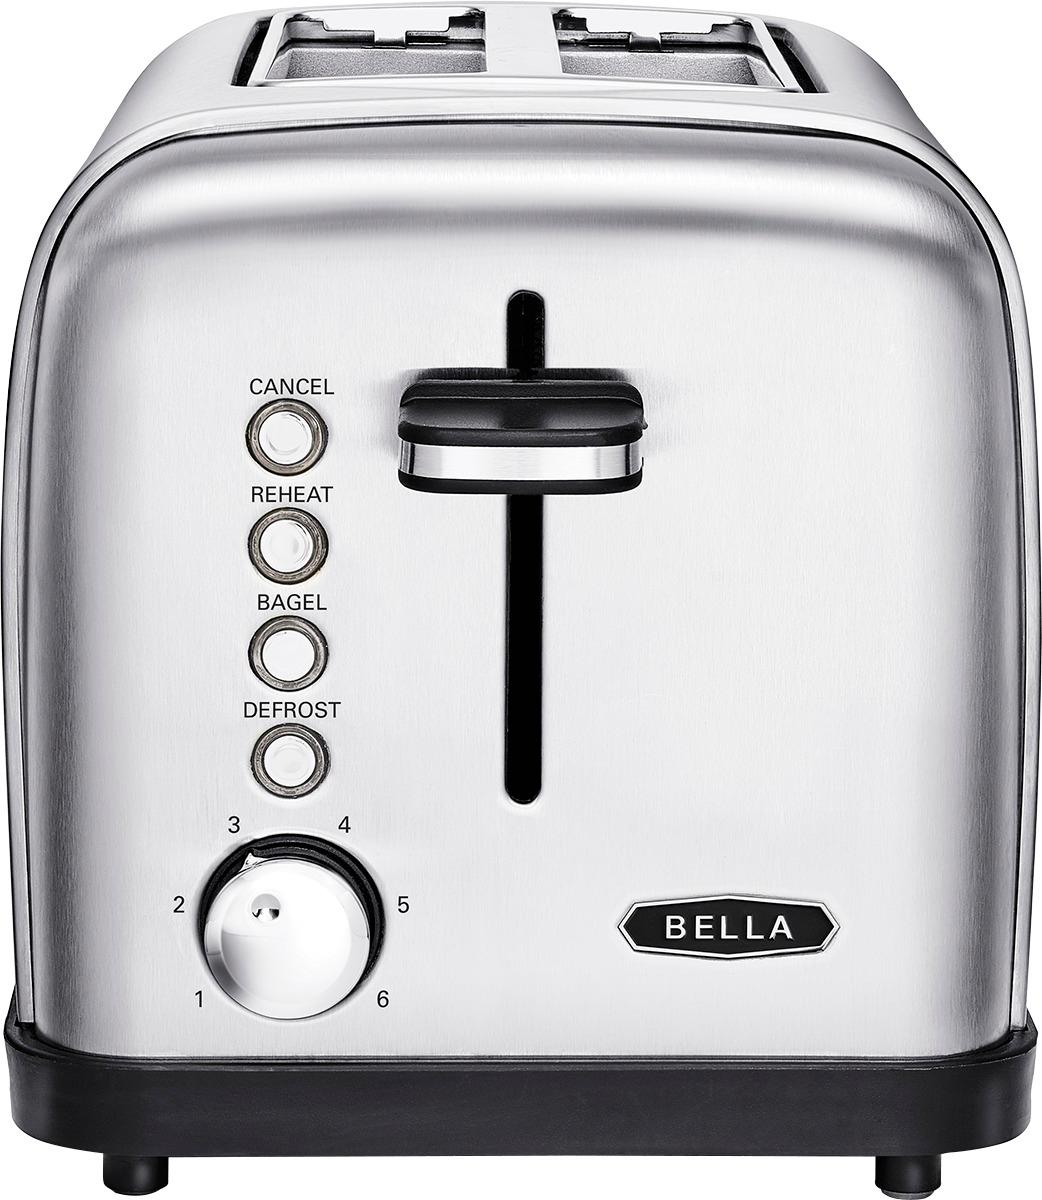 Bella – Classics 2-Slice Wide-Slot Toaster – Stainless Steel – Just $14.99 at Best Buy